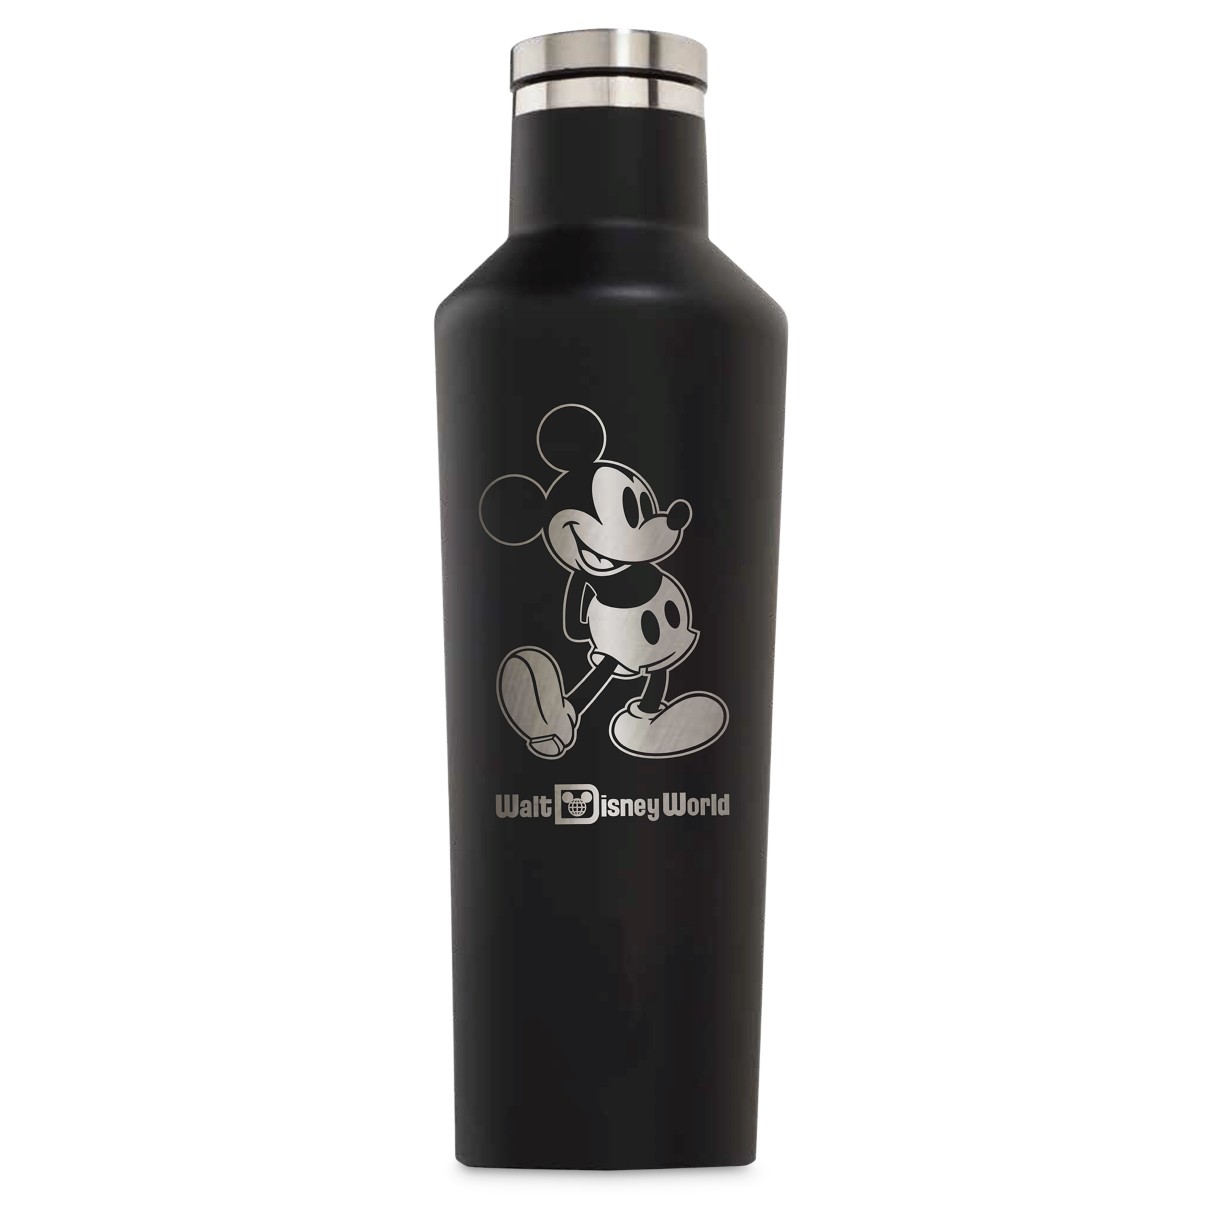 Corkcicle Disney Mickey Mouse White Stainless Steel Canteen, 16 oz.